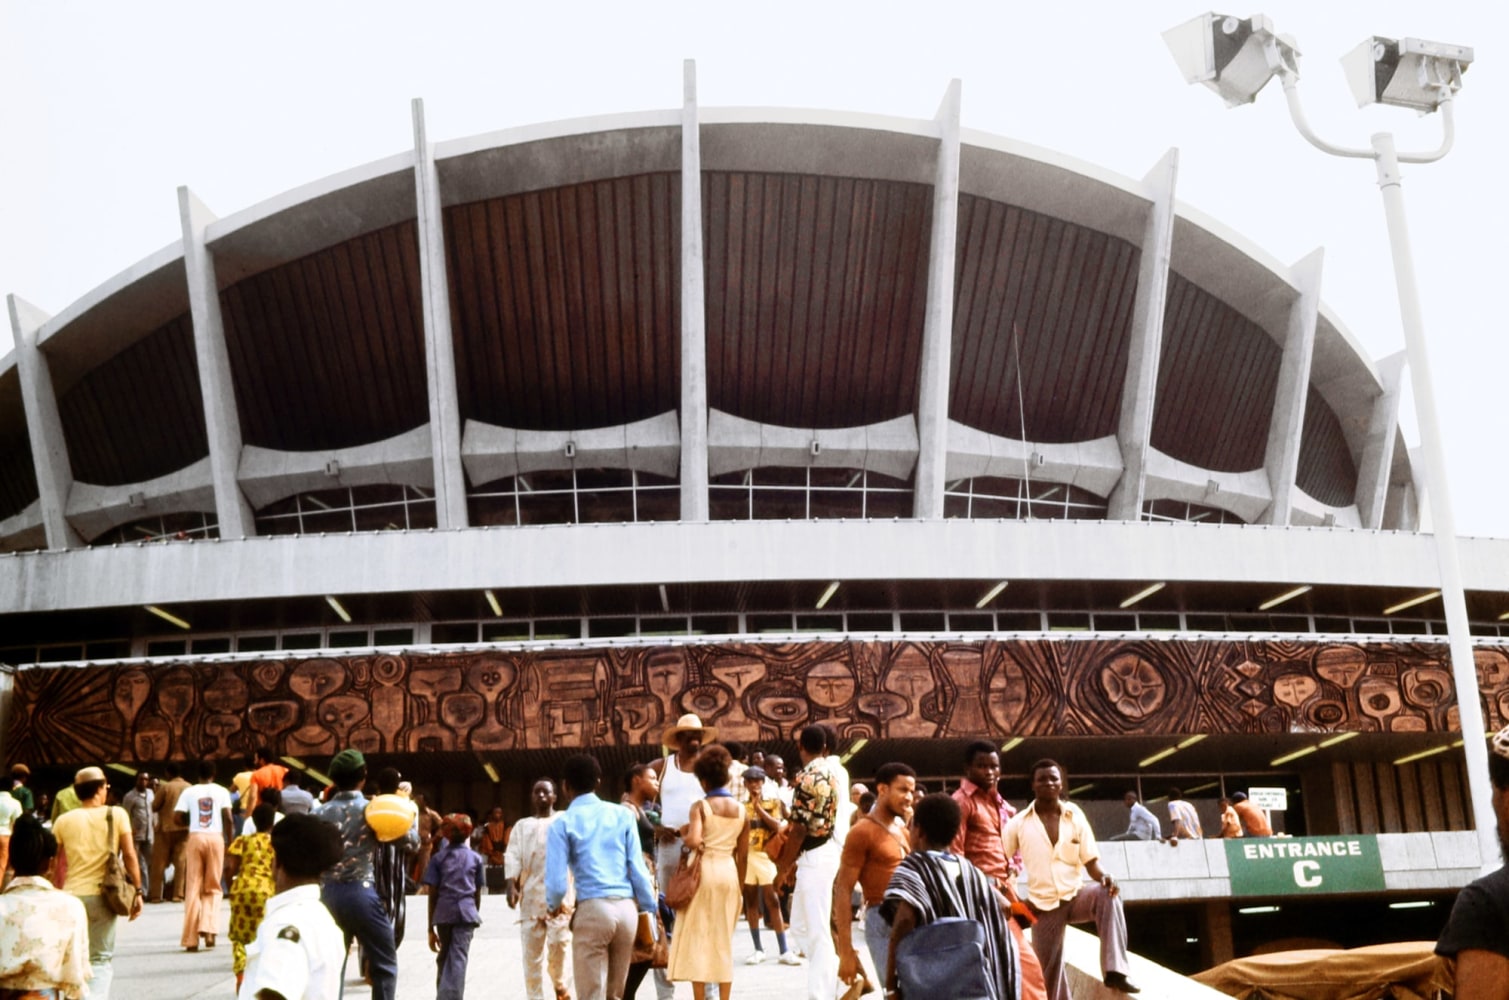 K. Kofi Moyo (b. 1939)
National Theater Lagos, Nigeria venue of Indoor Events, 1977
Archival inkjet print on Simply Elegant Gold Fibre paper&amp;nbsp;
Image: 13 1/4 x 20 inches (33.7 x 50.8 cm)
Sheet: 17 x 22 inches (43.2 x 55.9 cm)
Framed: 18 5/8 &amp;times; 25 3/8 &amp;times; 1 1/2 inches (47.3 &amp;times; 64.5 &amp;times; 3.8 cm)
Edition of 1, printed 2023